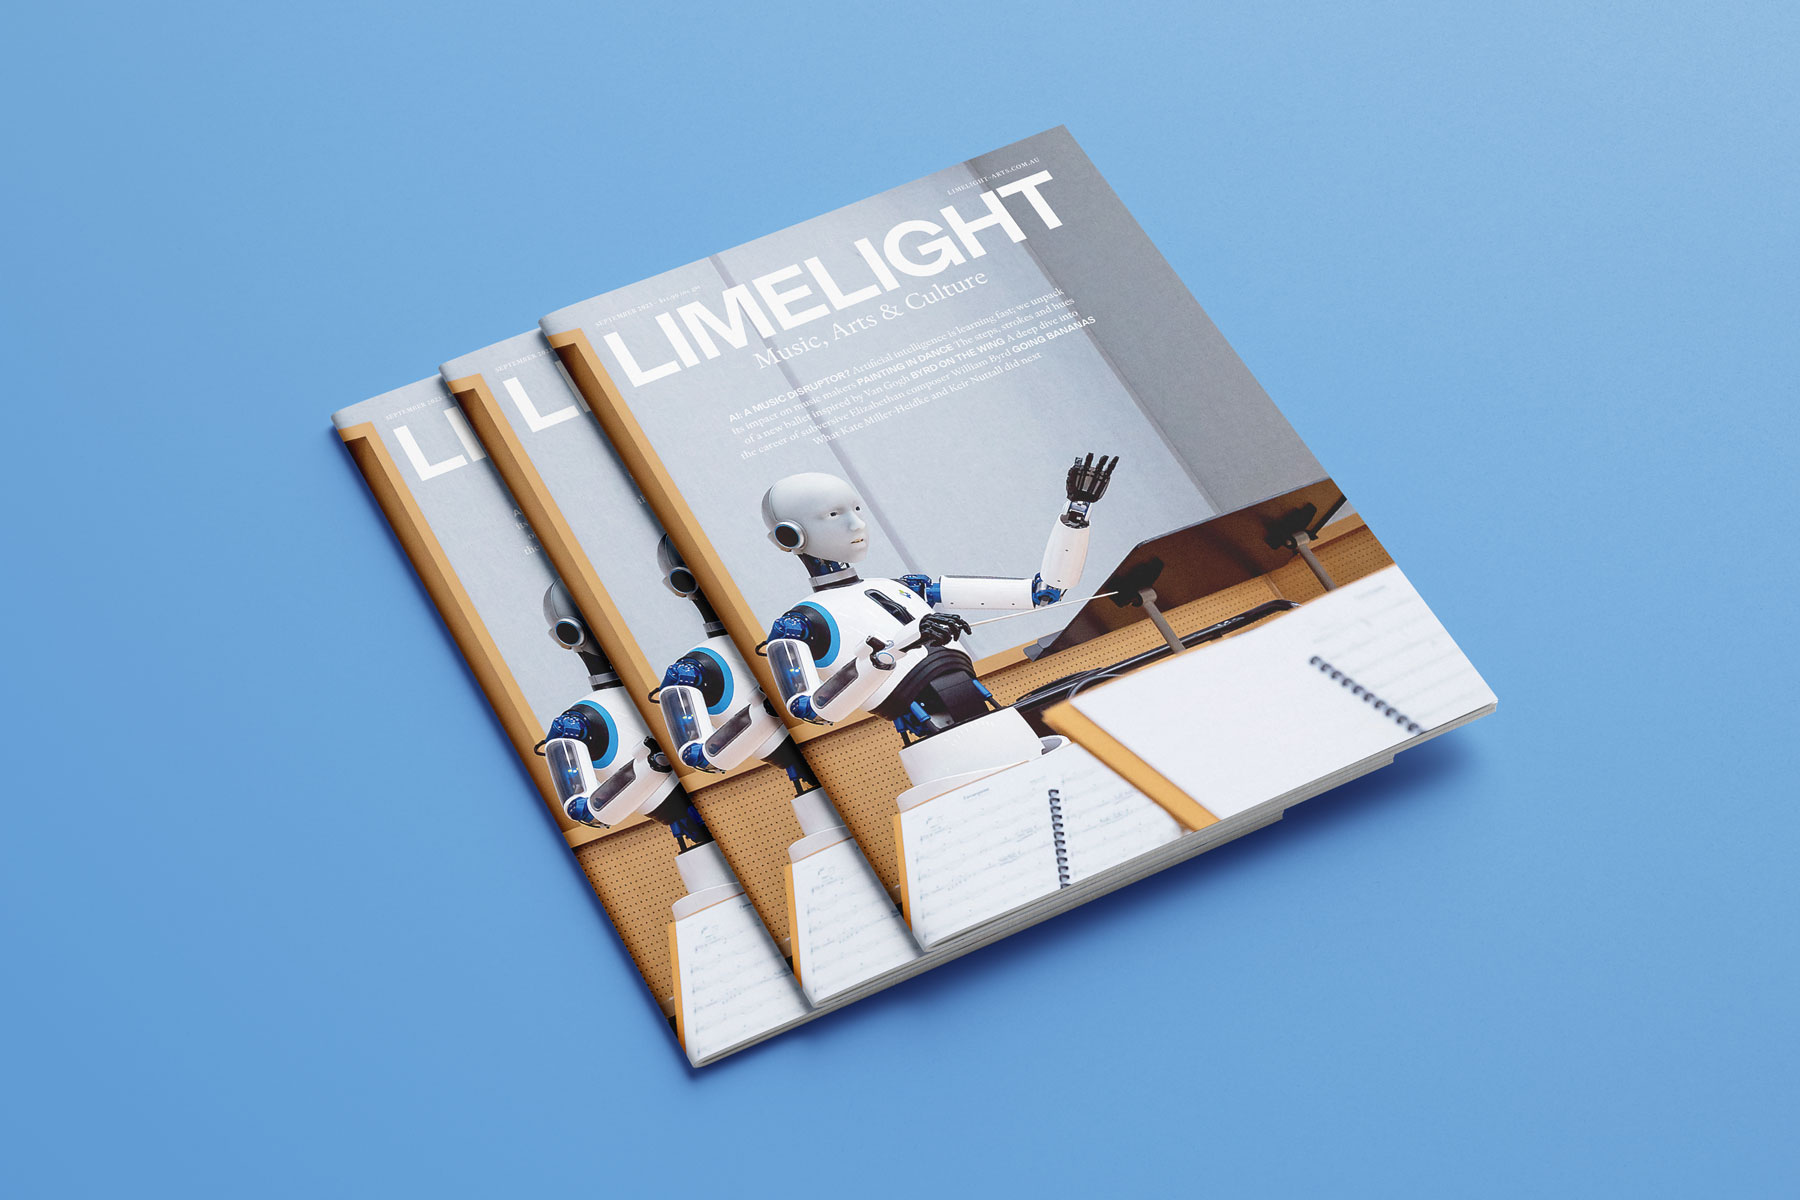 Several covers of Limelight's September 2023 issue, which features a robotic conductor, are spread across a blue background.